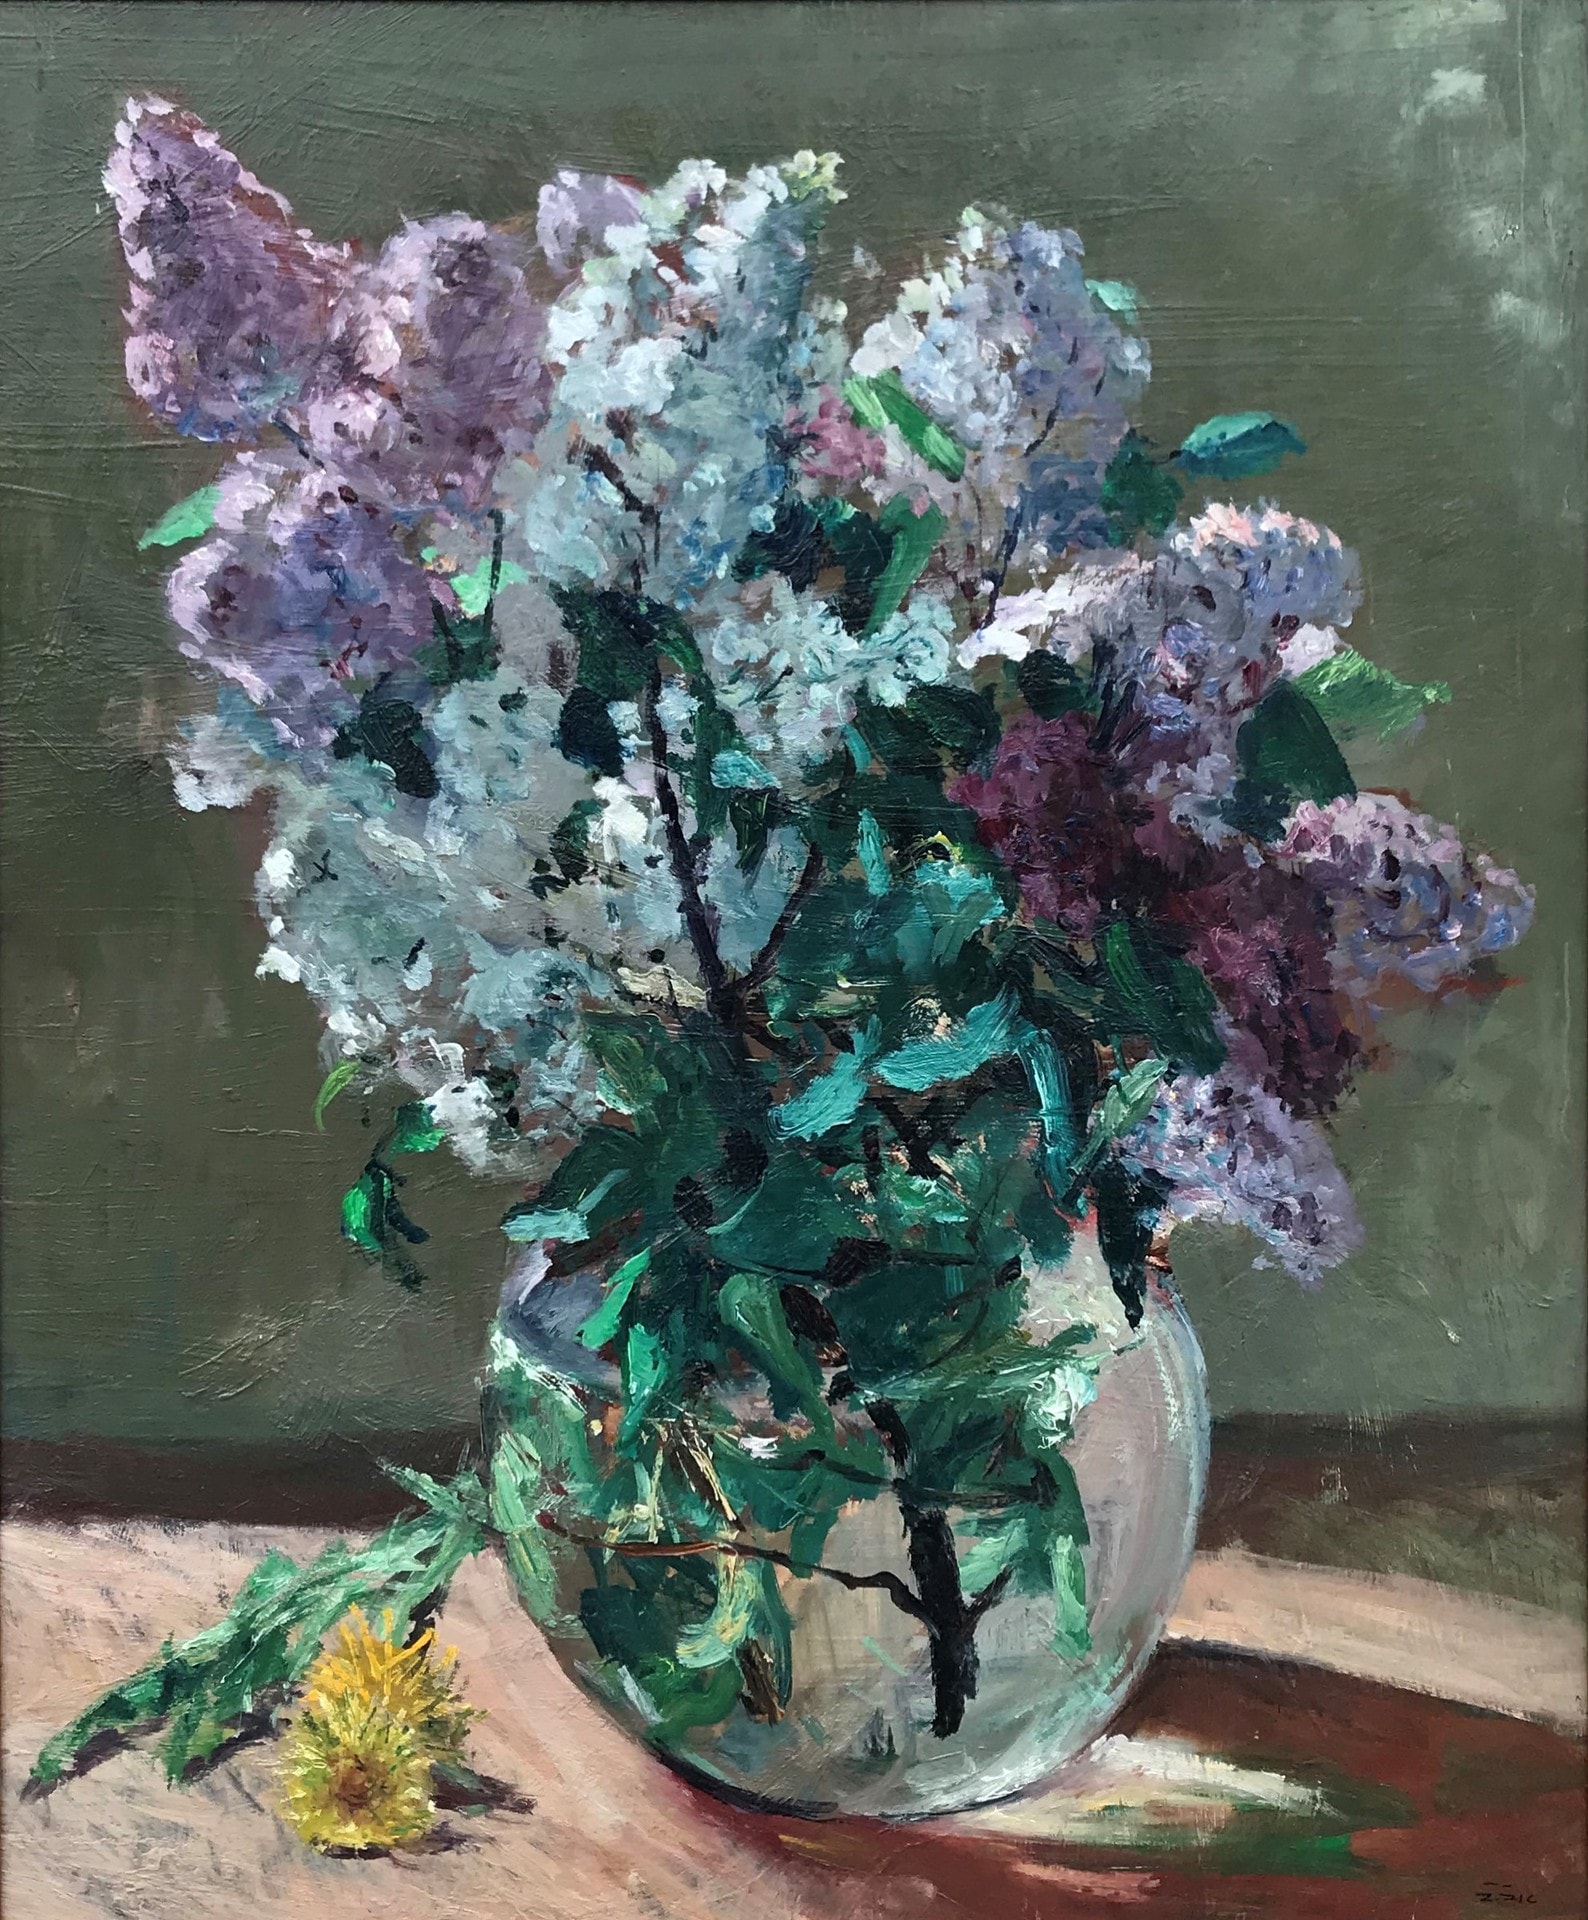 Zivko Zic's Still life with Lilacs. Painted against a dark green background.